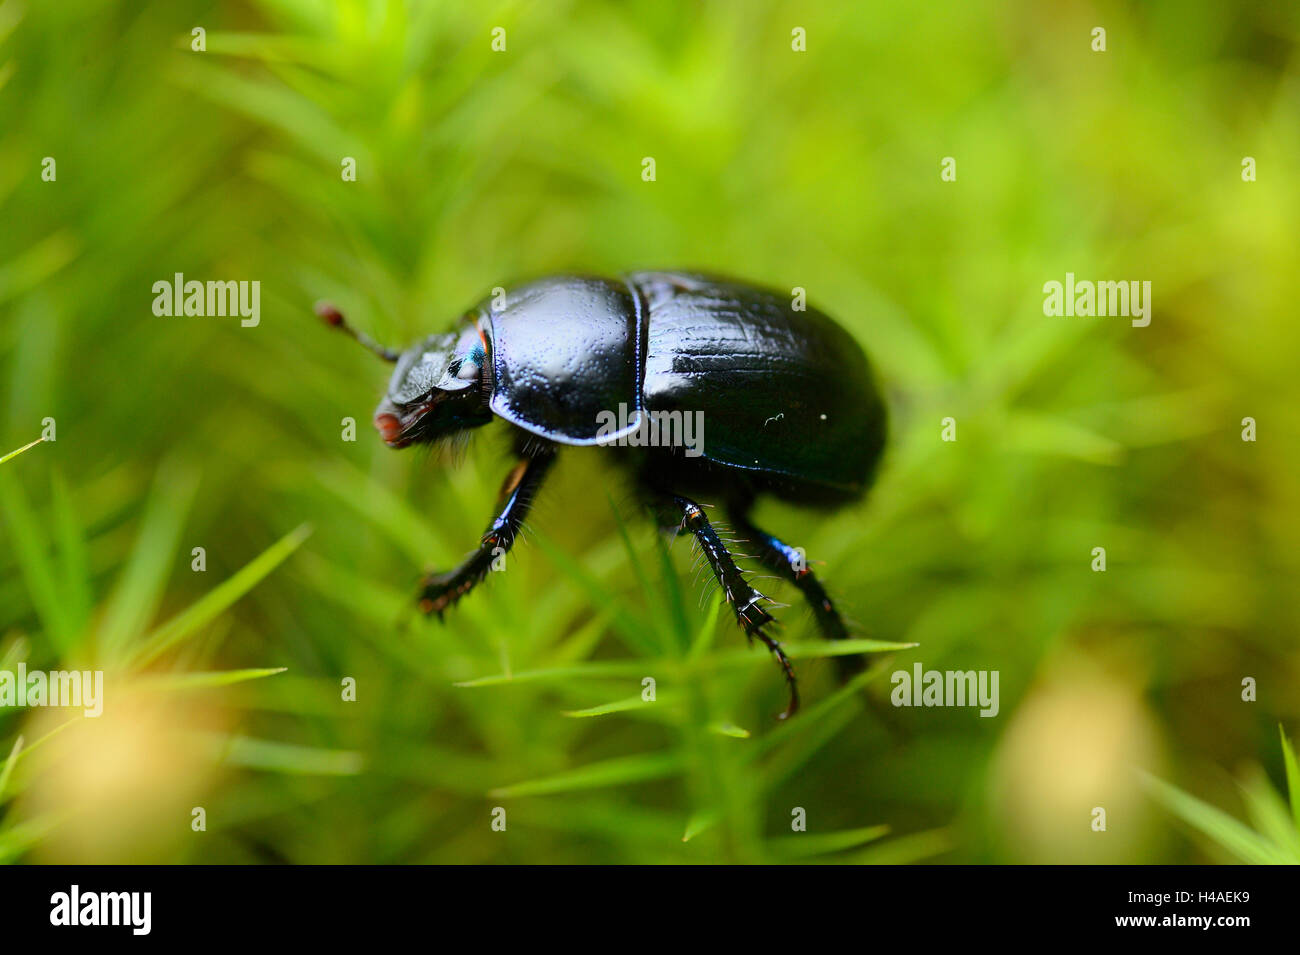 dung beetle, Anoplotrupes stercorosus, moss, side view, Stock Photo